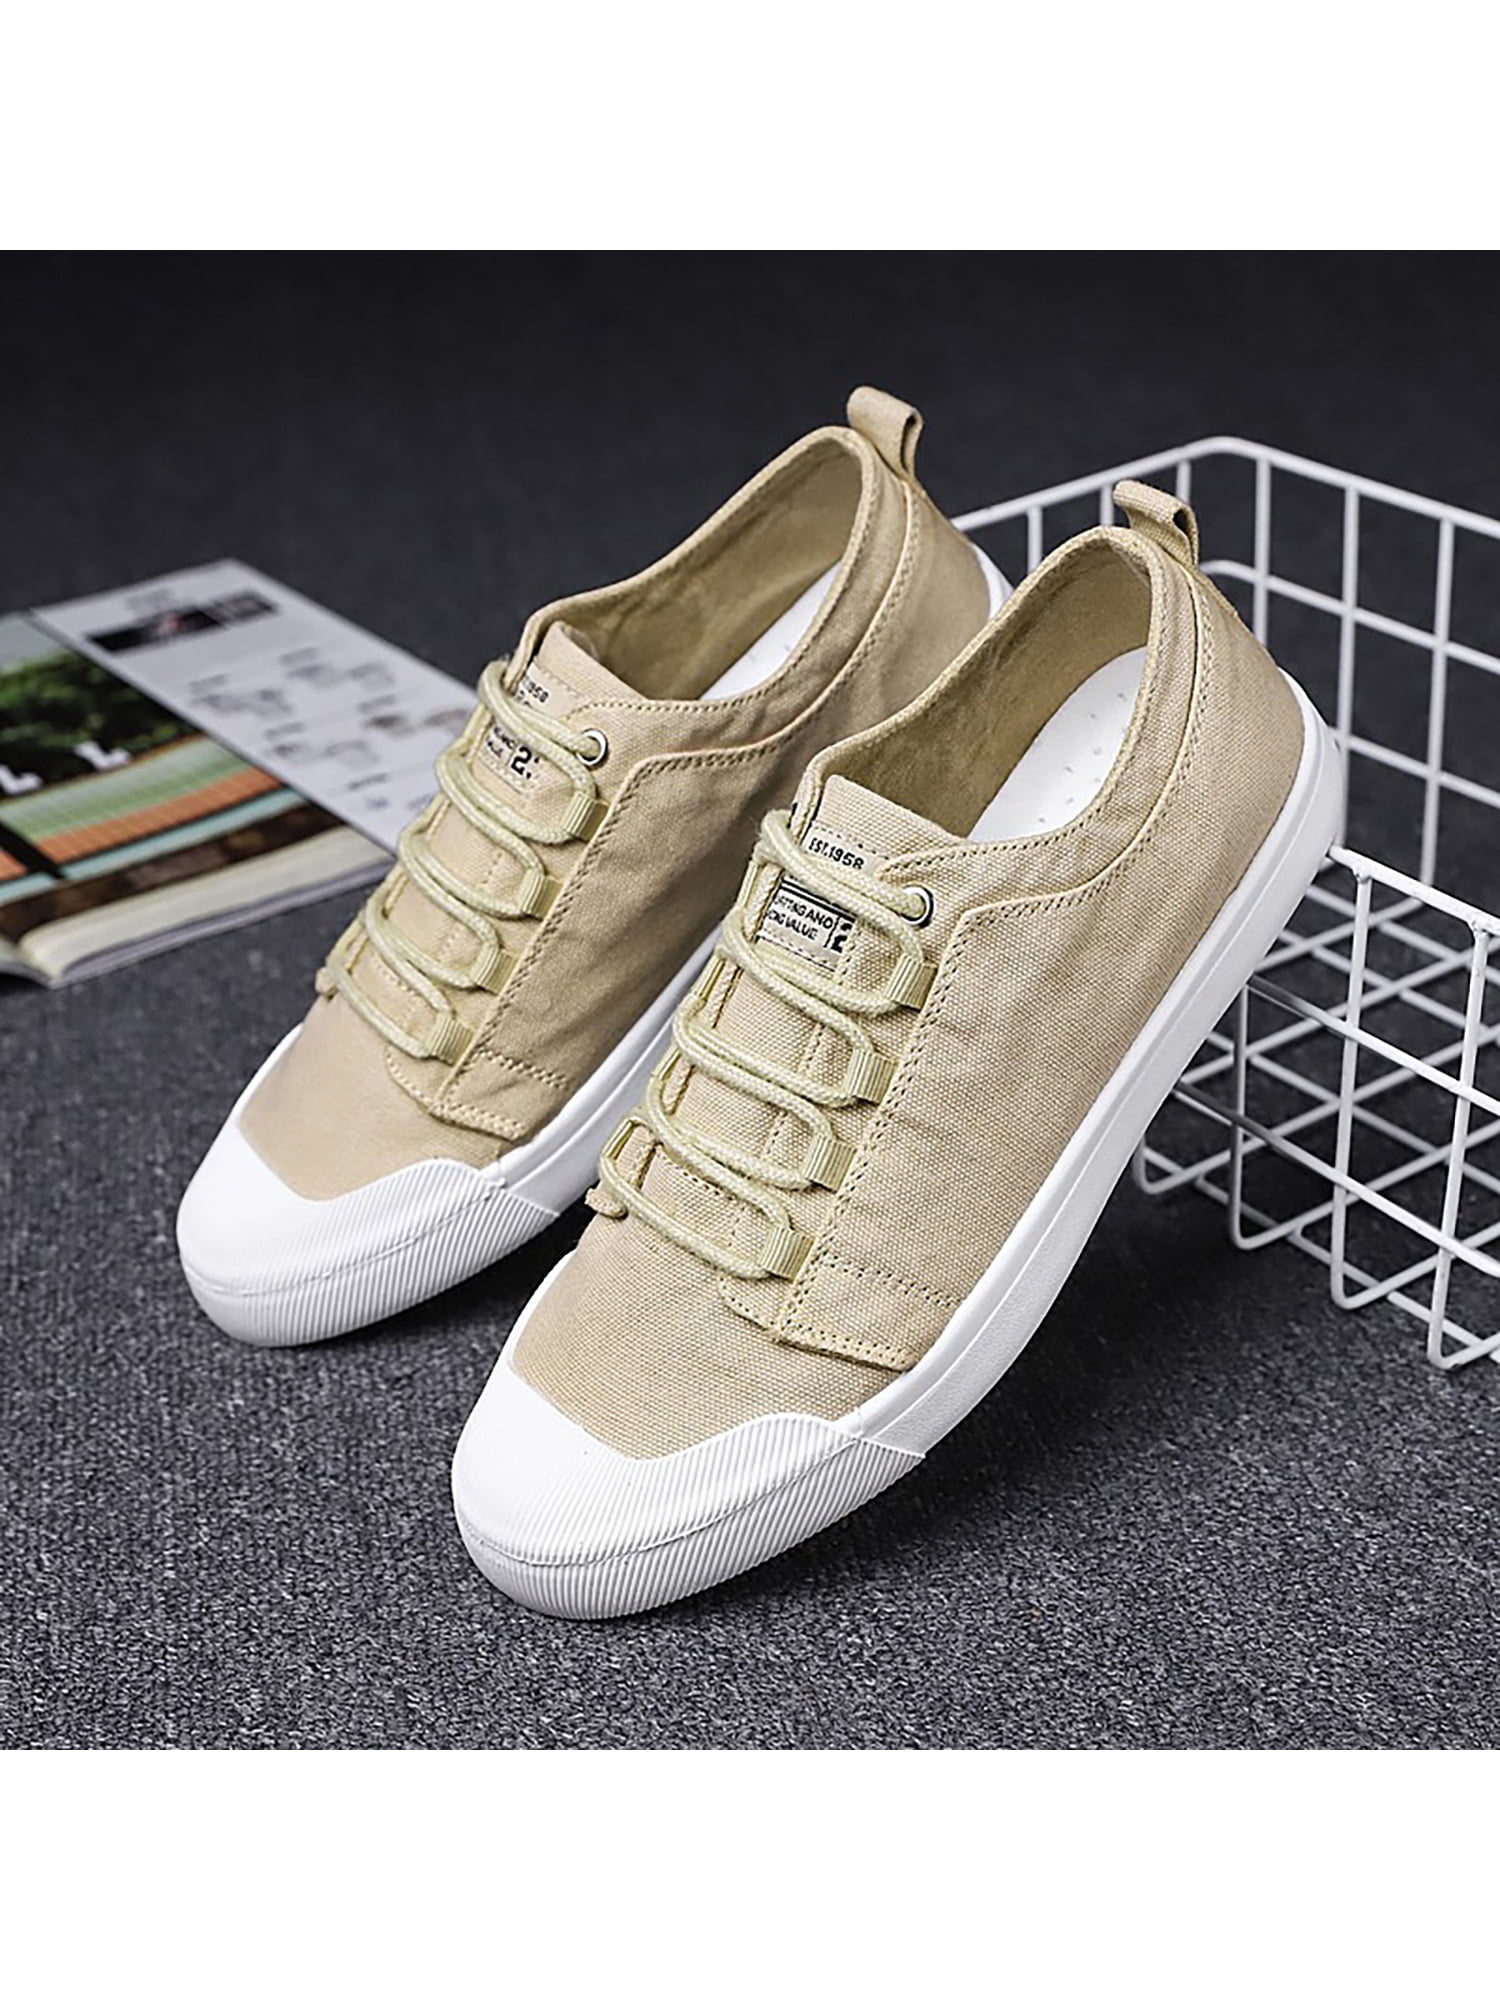 MENS FLAT BASEBALL CASUAL LACE UP CANVAS TRAINERS PLIMOSOLL PUMPS SHOES SIZE 